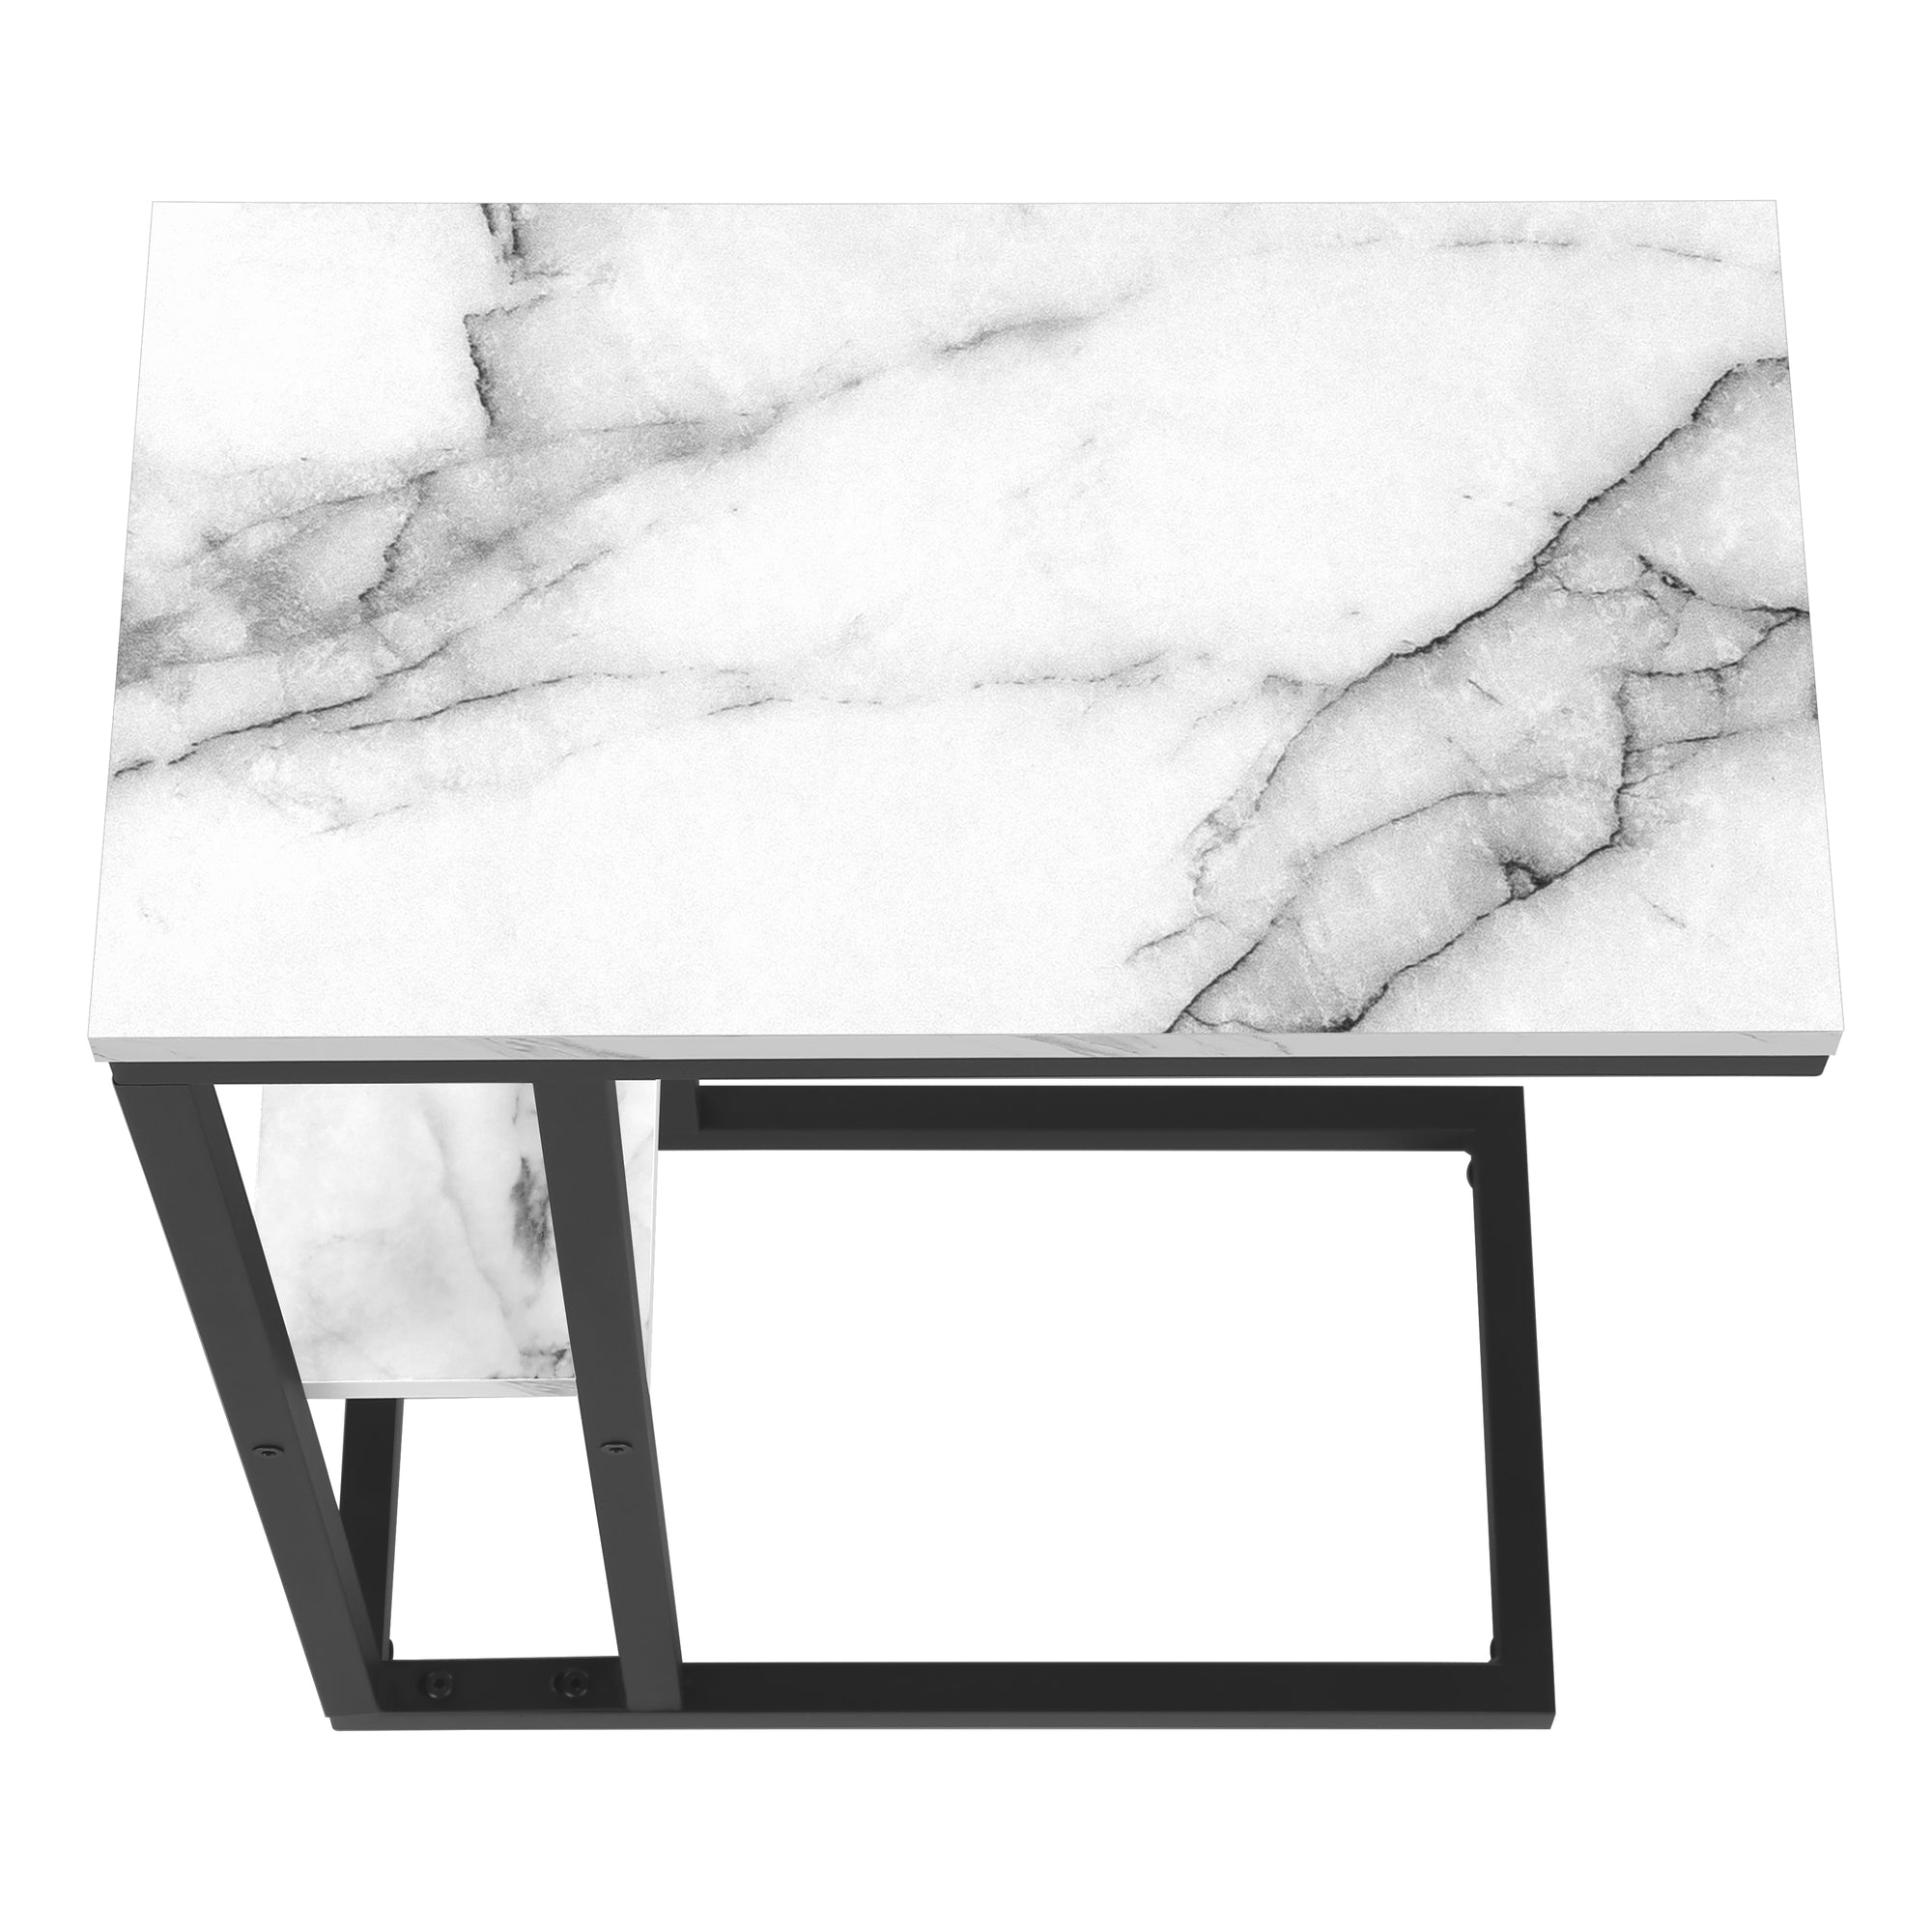 MN-213675    Accent Table, C-Shaped, End, Side, Snack, Living Room, Bedroom, Metal Legs, Laminate, White Marble Look, Black, Contemporary, Modern